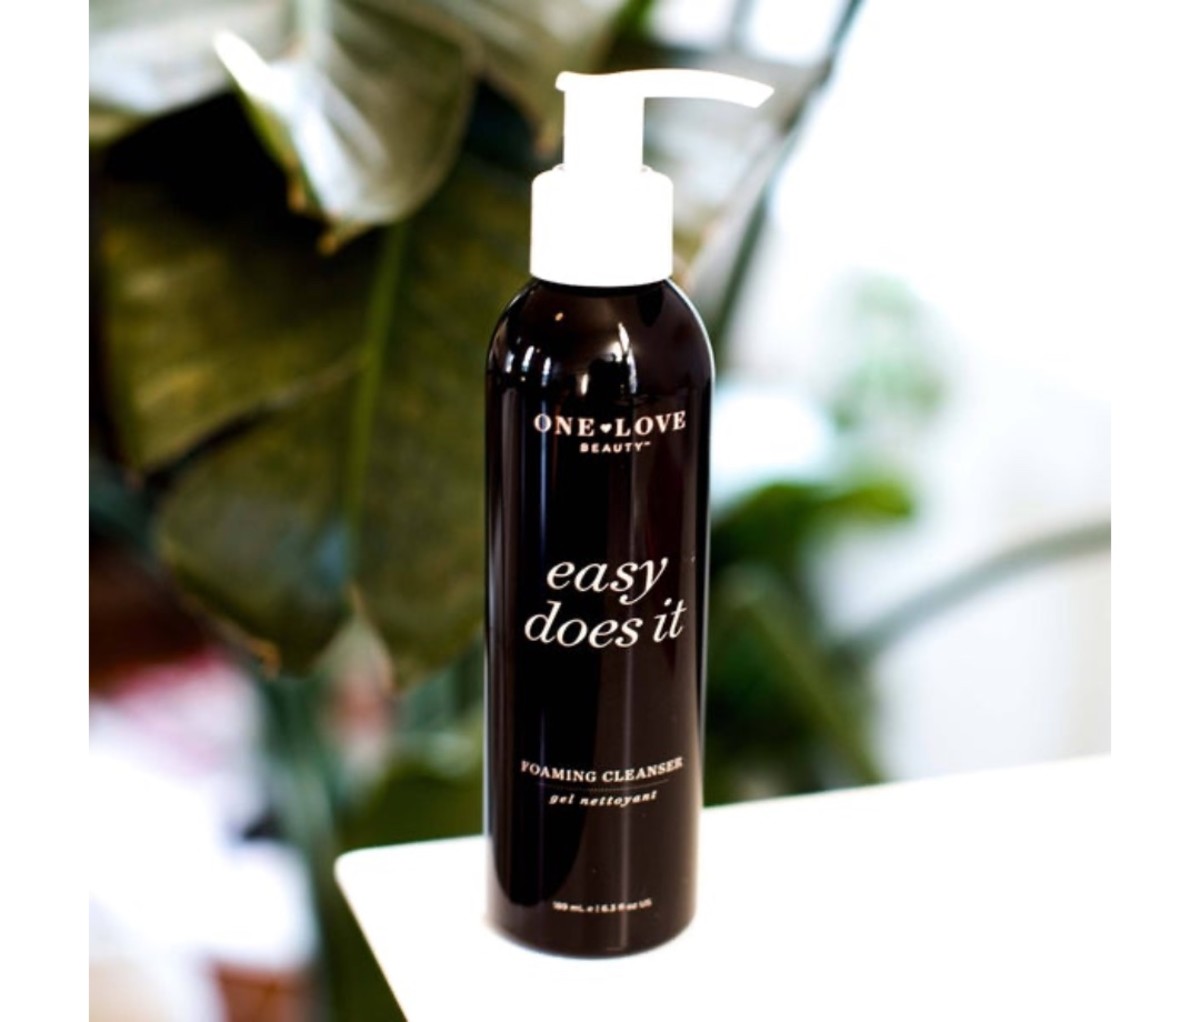 Easy Does It foam cleaner from One Love Organics